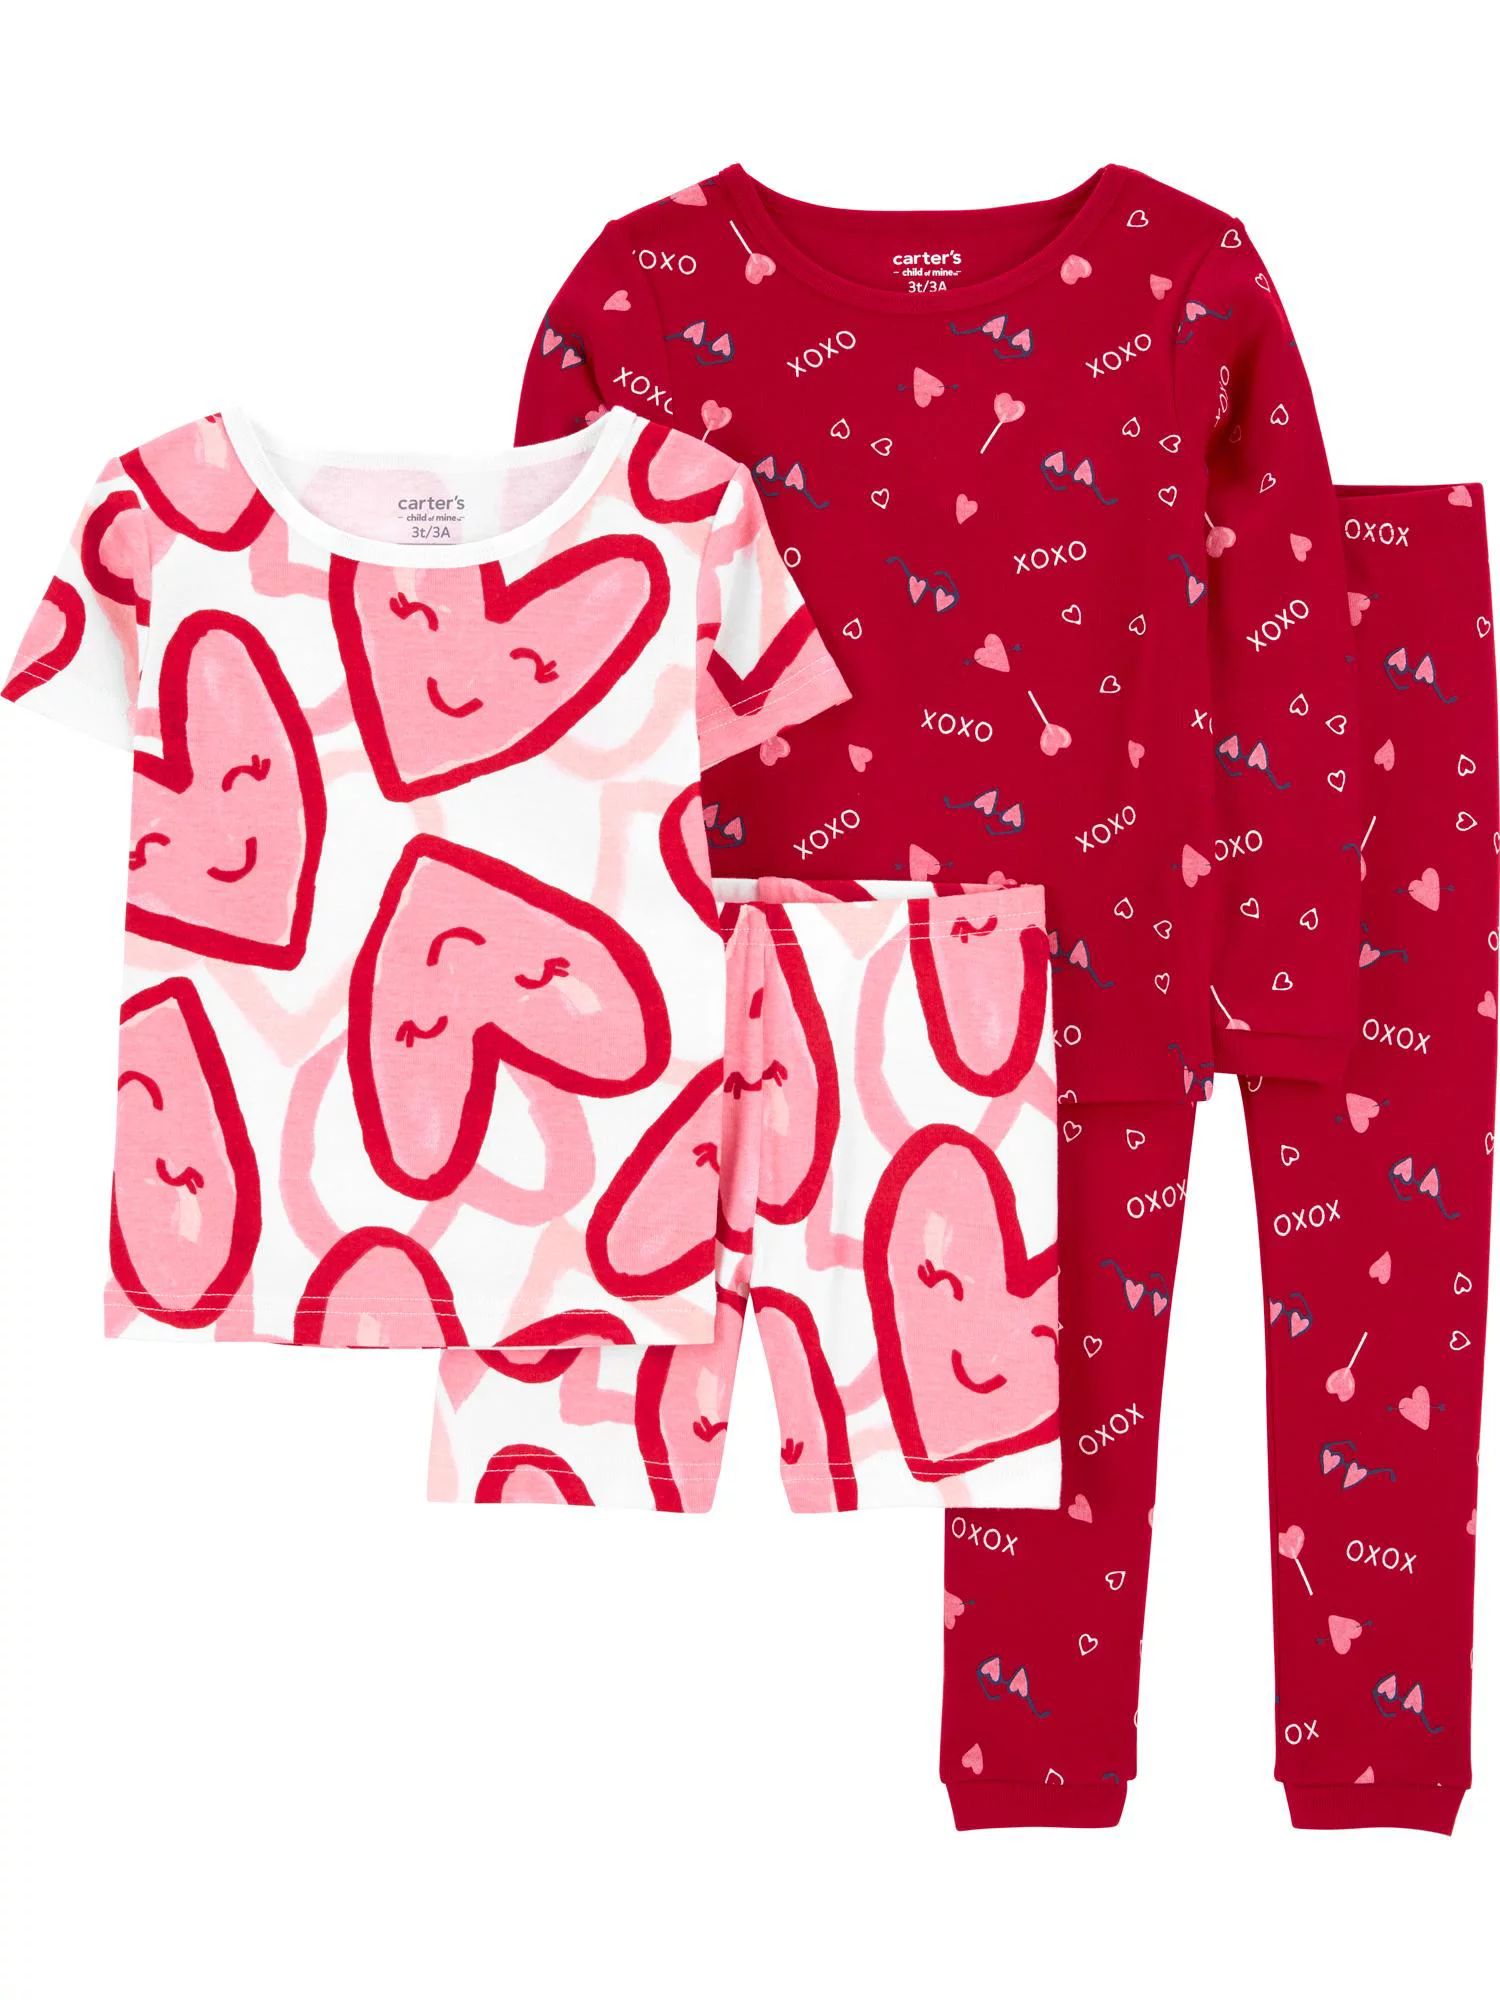 Carter's Child of Mine Baby and Toddler Girl Valentine's Day Pajama Set, 4-Piece, Sizes 12M-5T | Walmart (US)